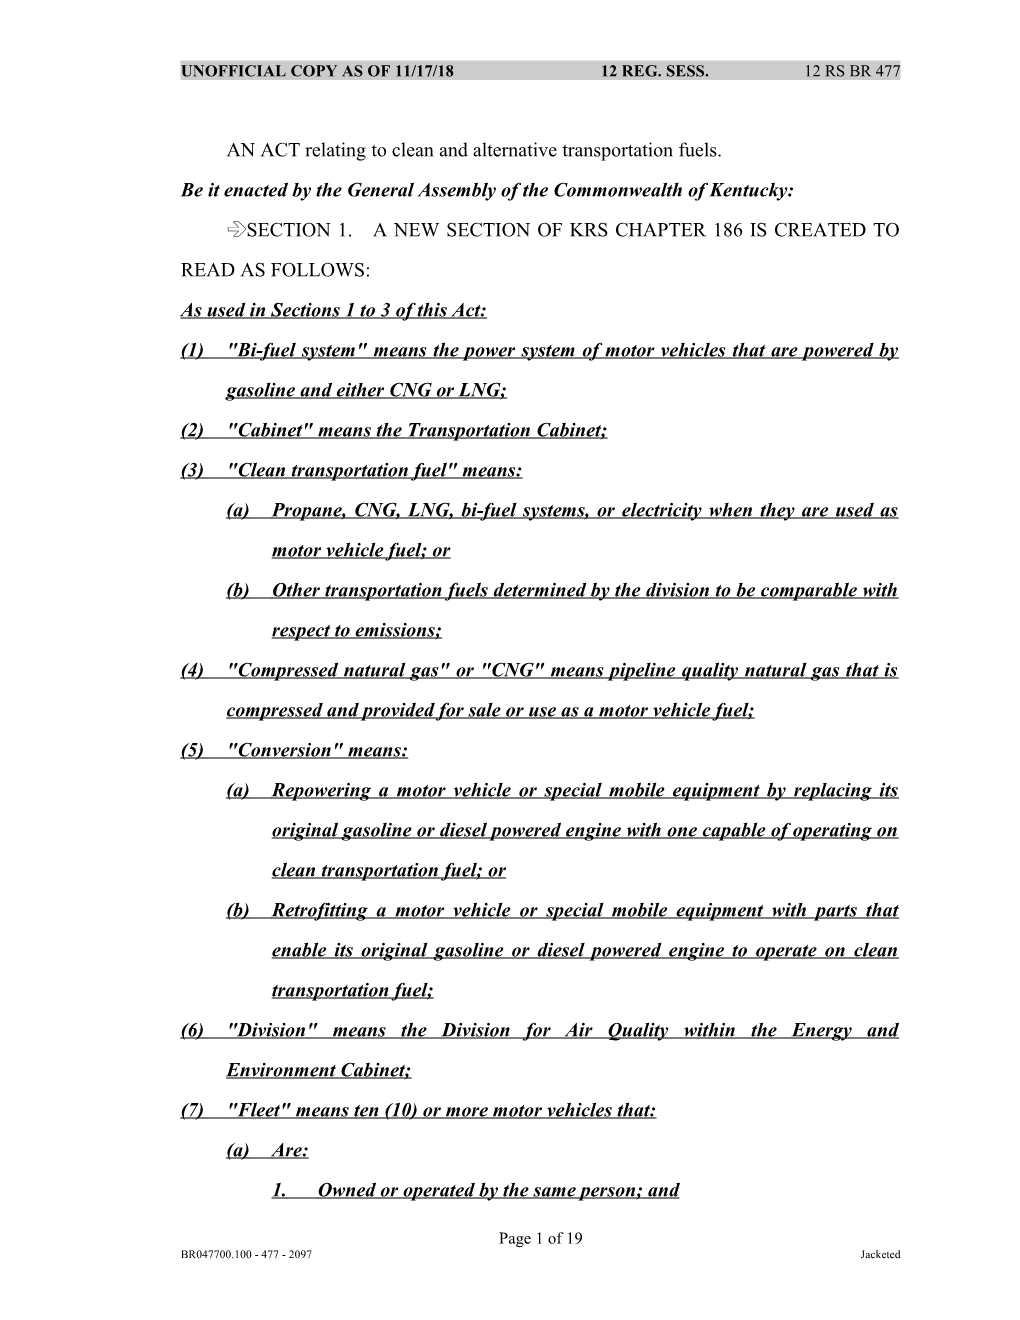 AN ACT Relating to Clean and Alternative Transportation Fuels